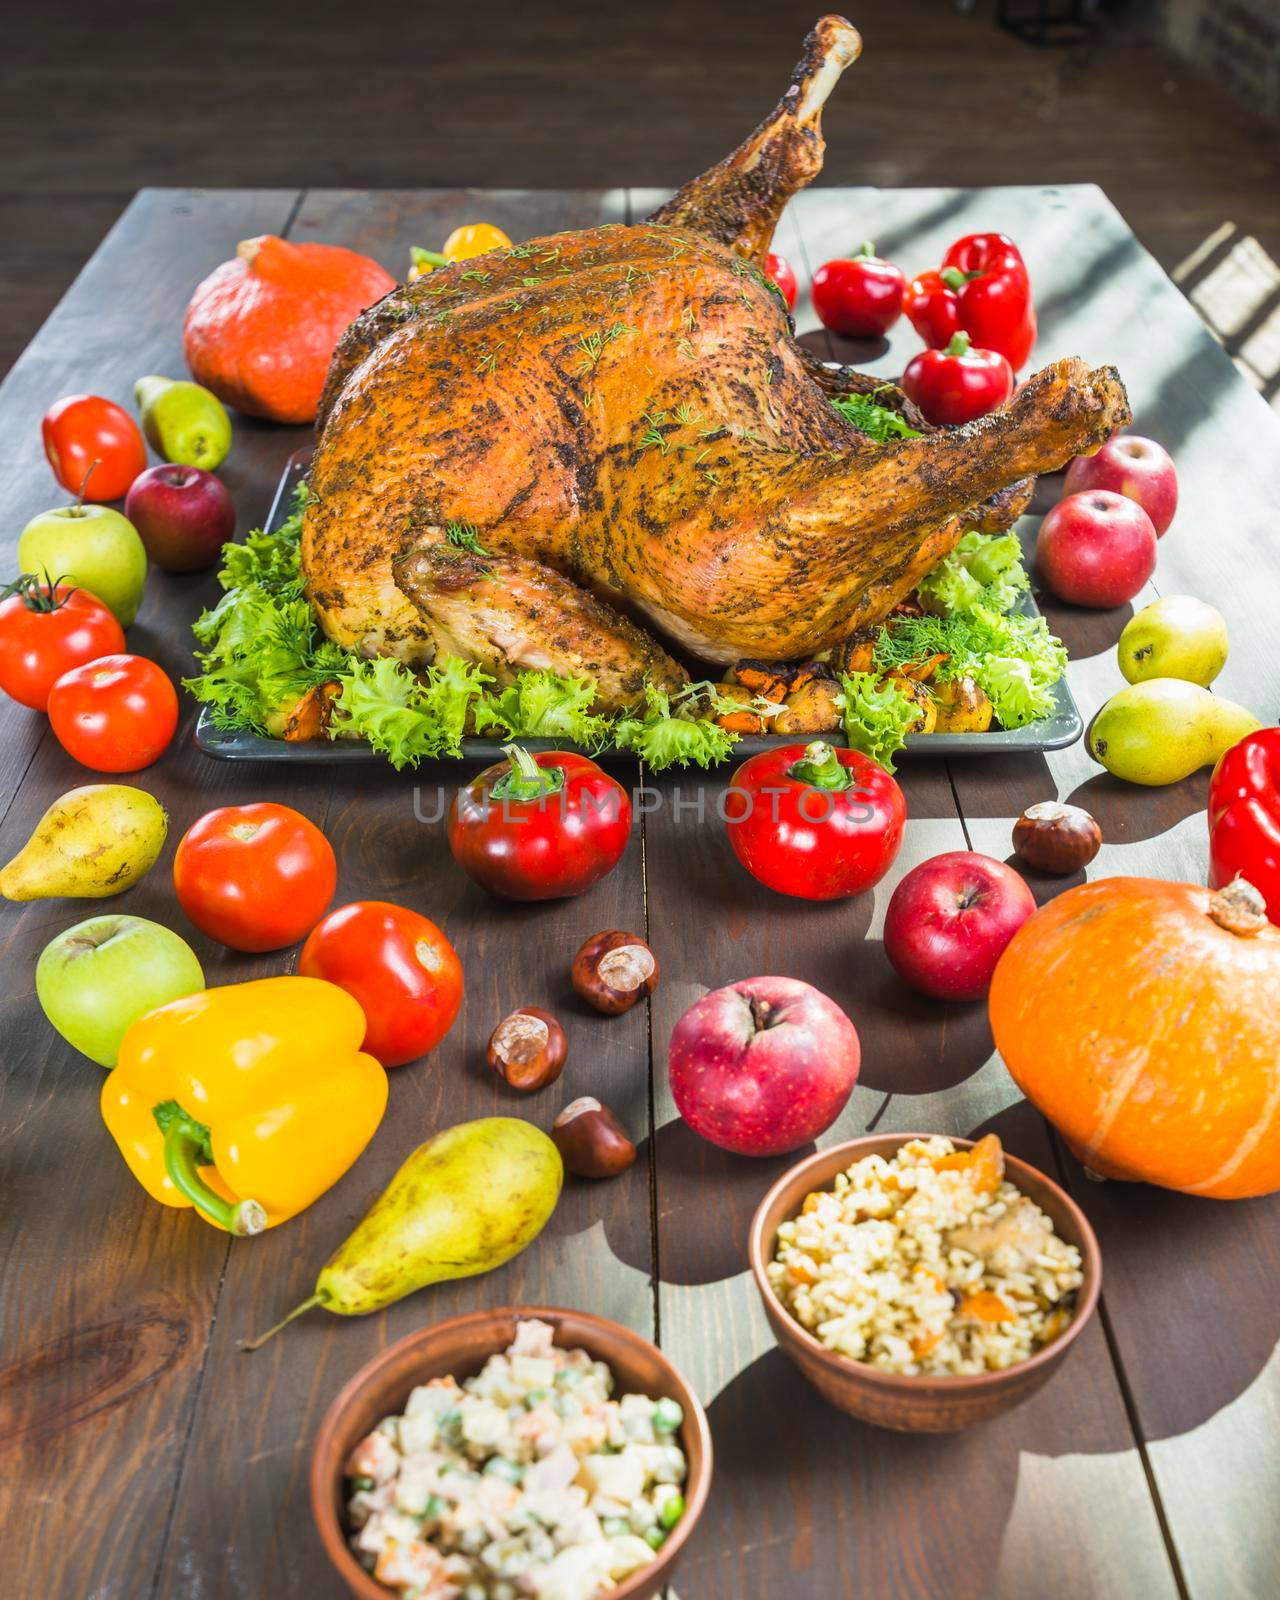 roasted turkey with vegetables wooden table. High quality photo by Zahard